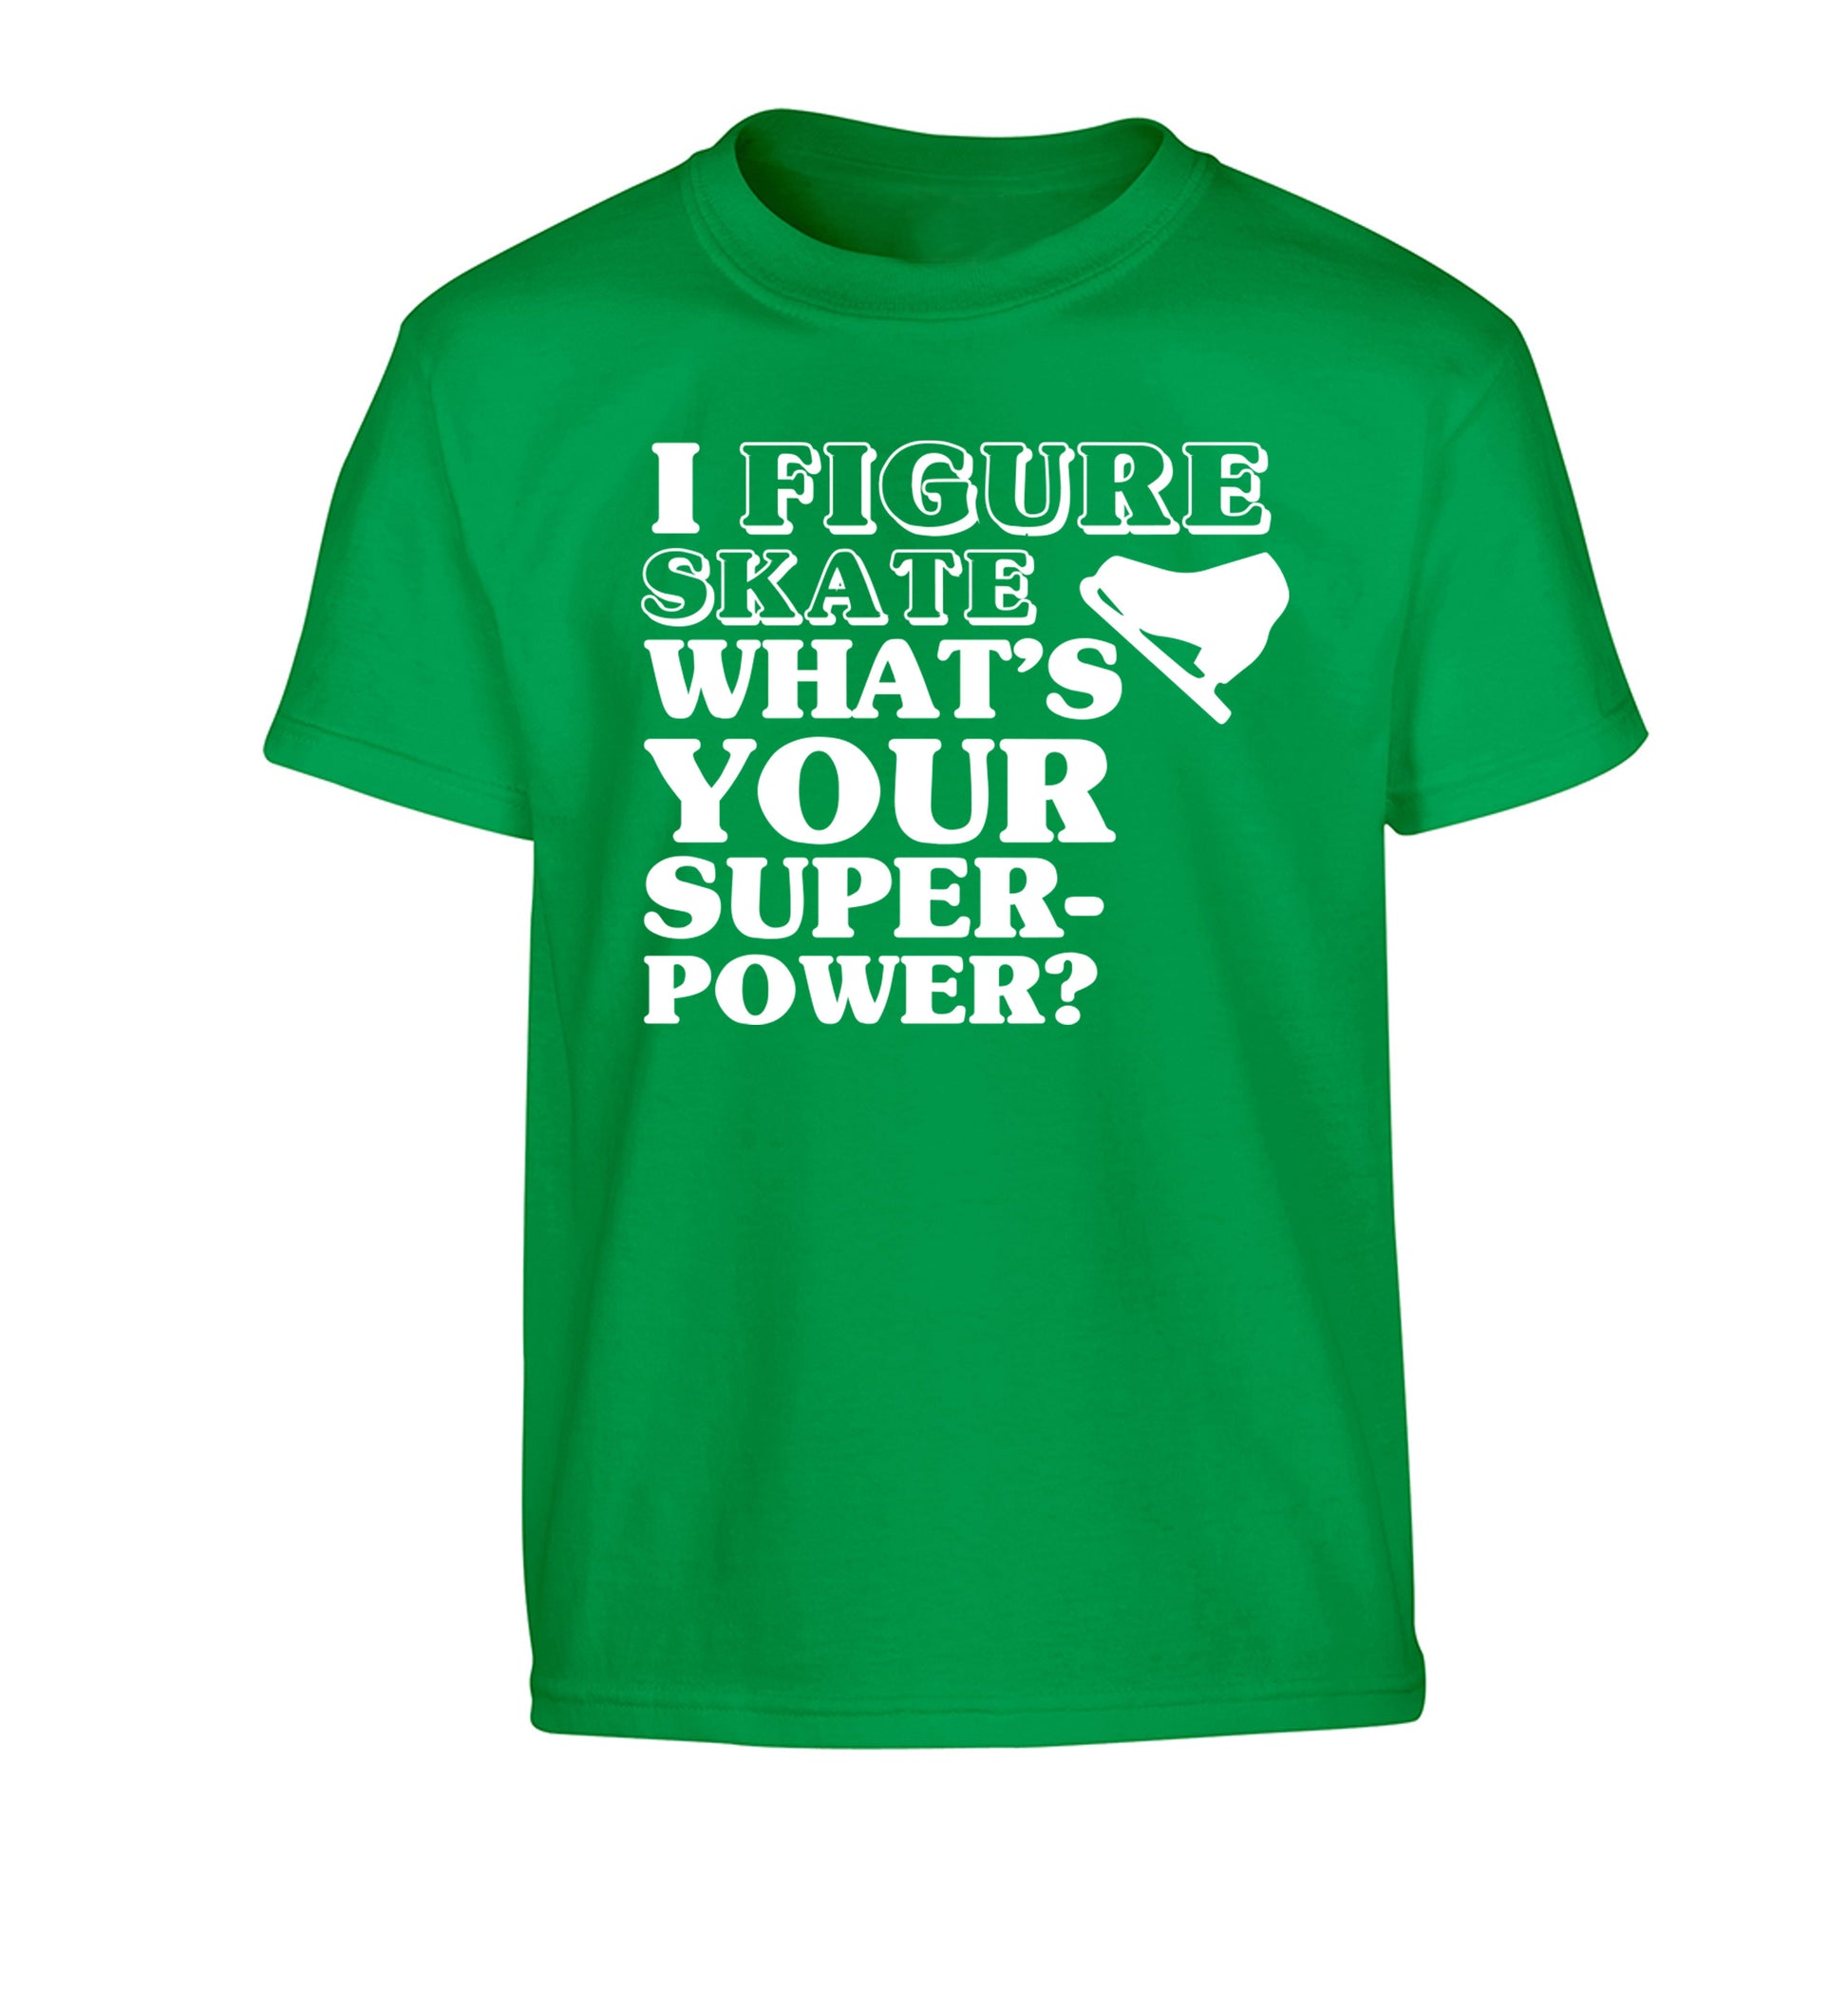 I figure skate what's your superpower? Children's green Tshirt 12-14 Years